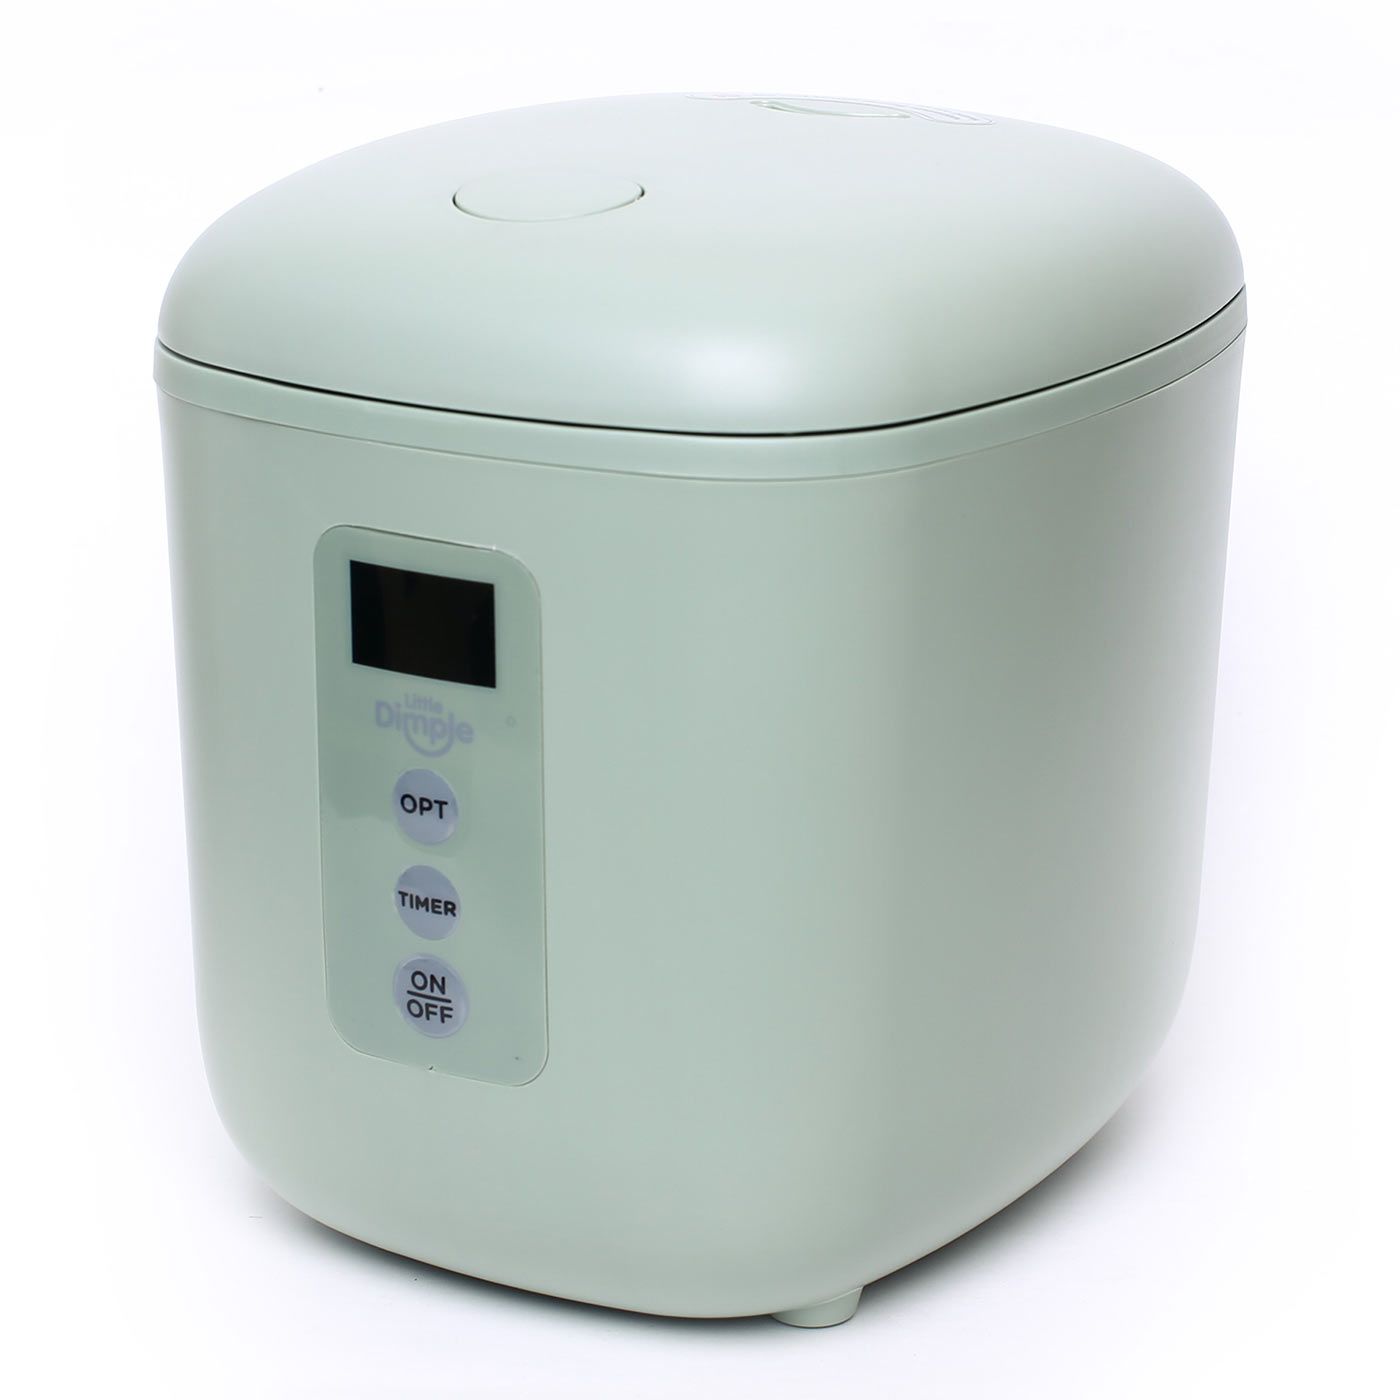 Little Dimple Mini Rice Cooker Green - 1